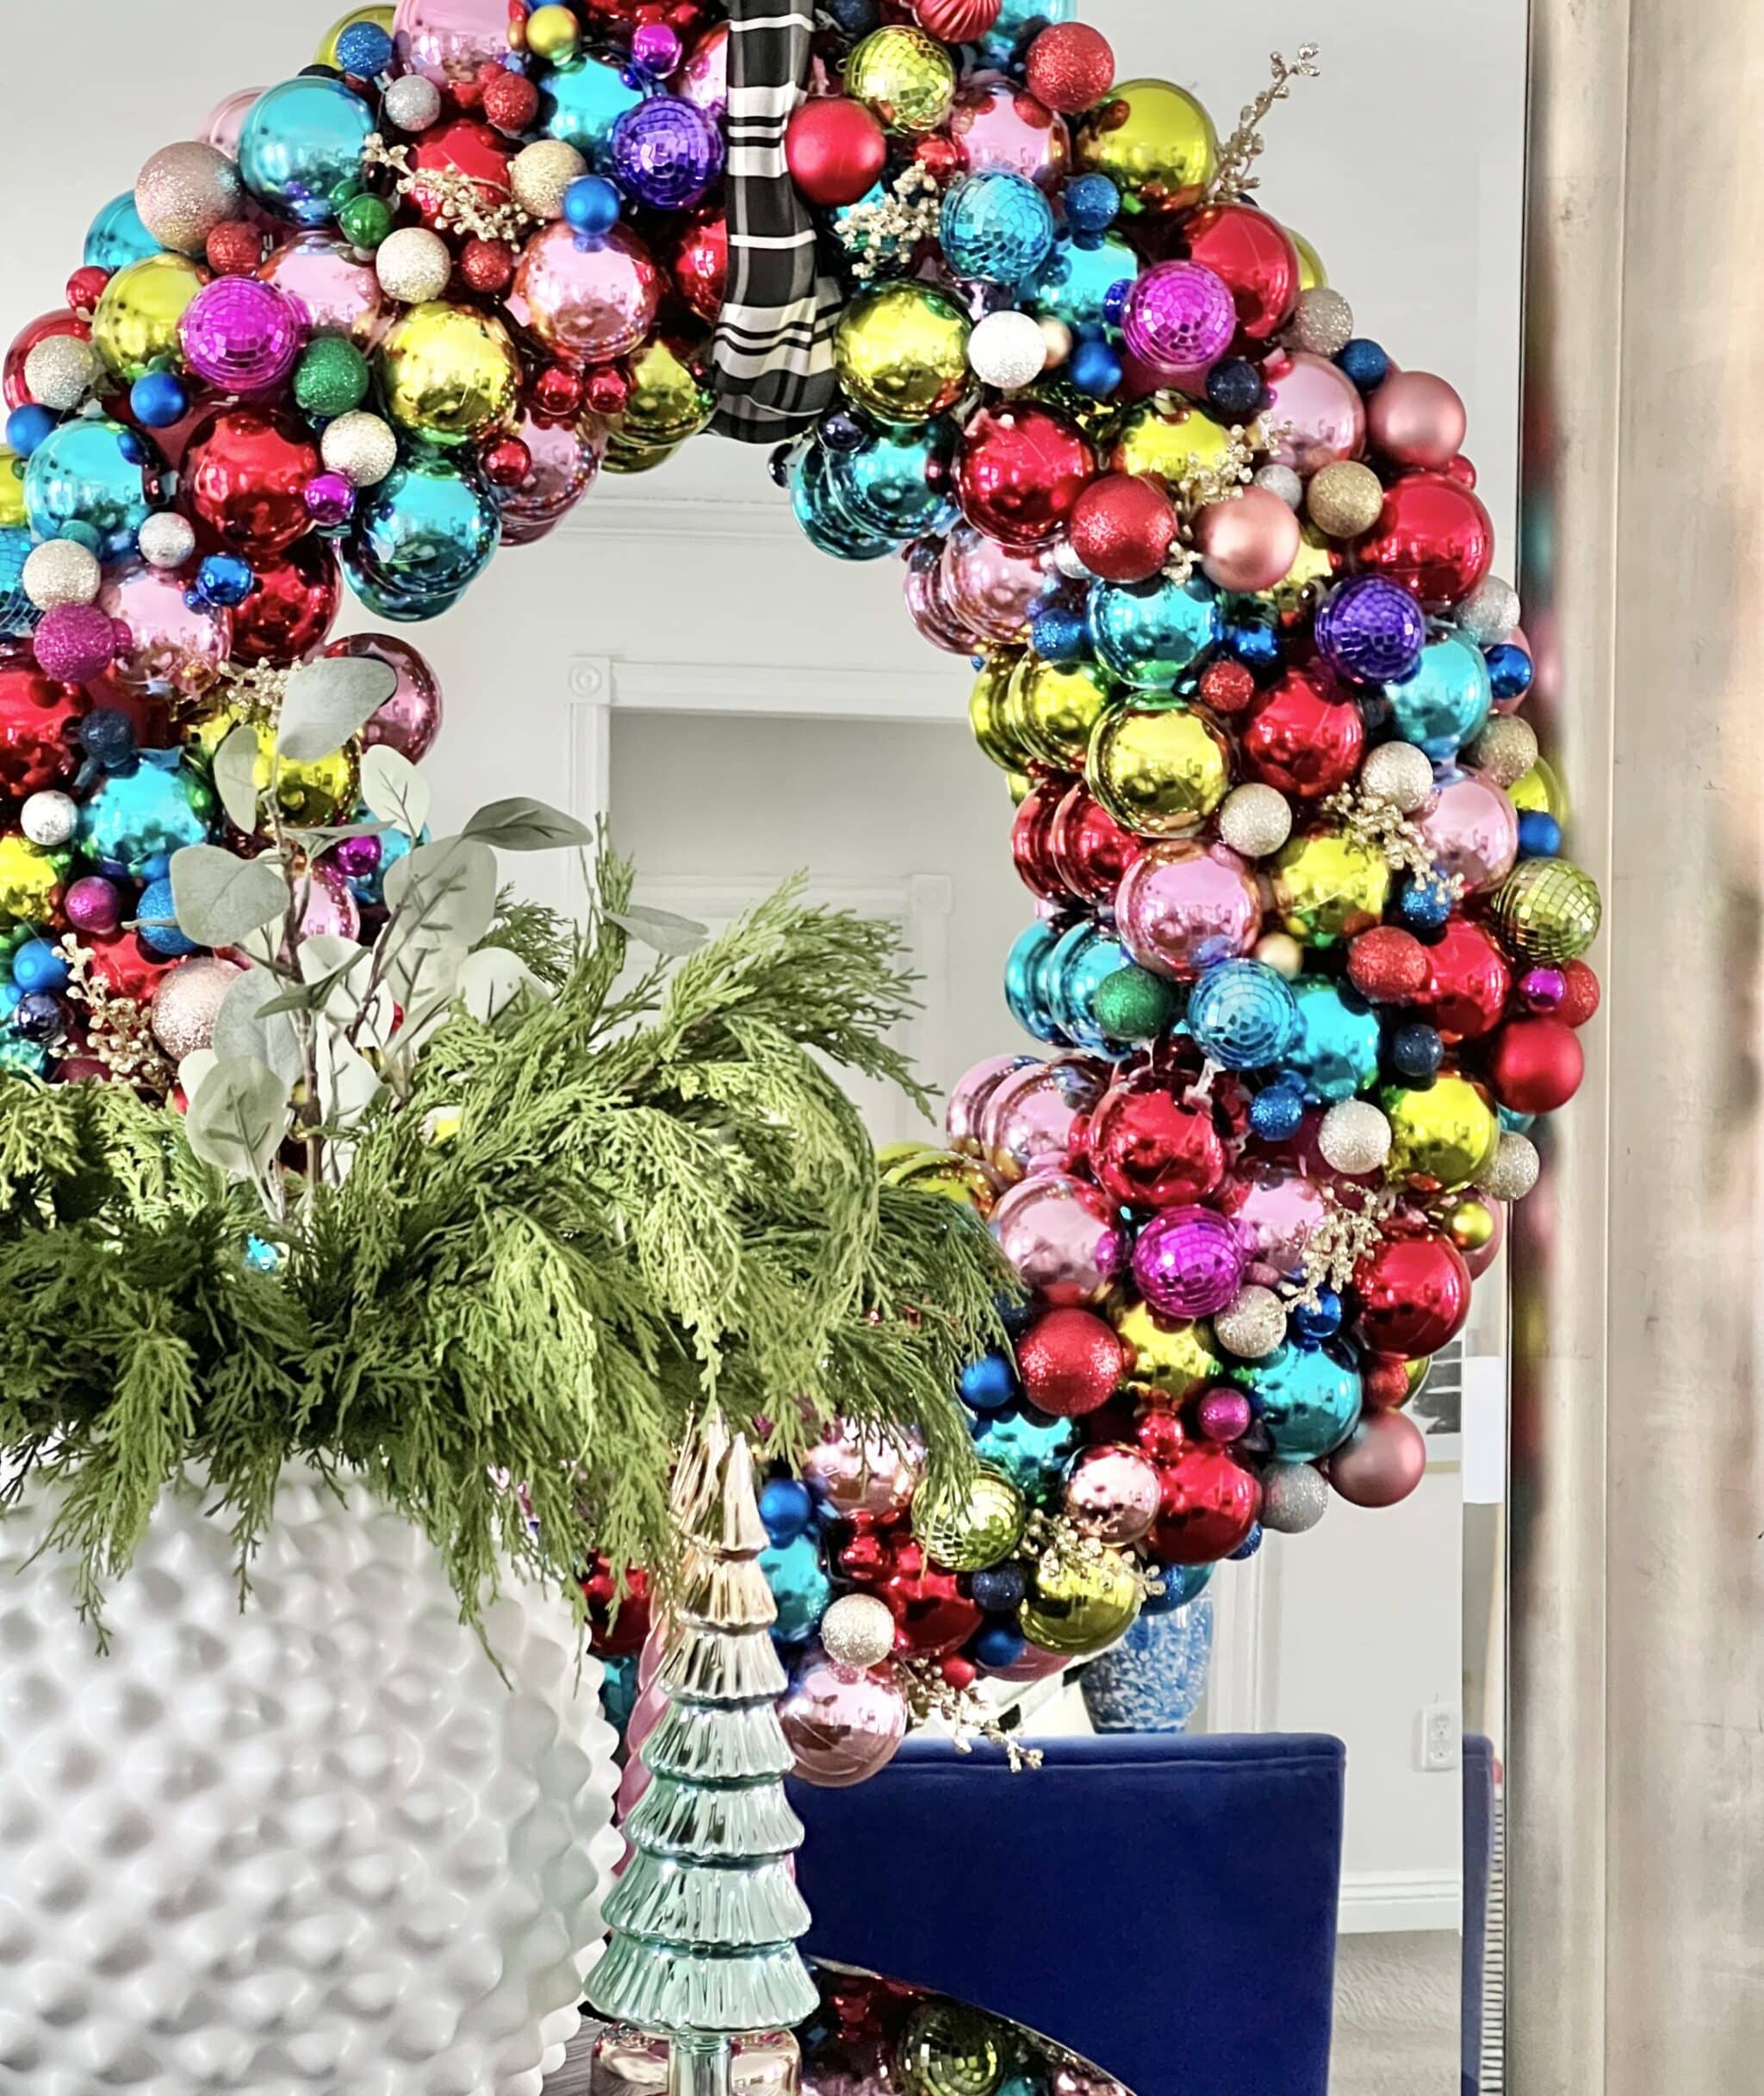 DIY Christmas pool noodle wreath hanging on a mirror